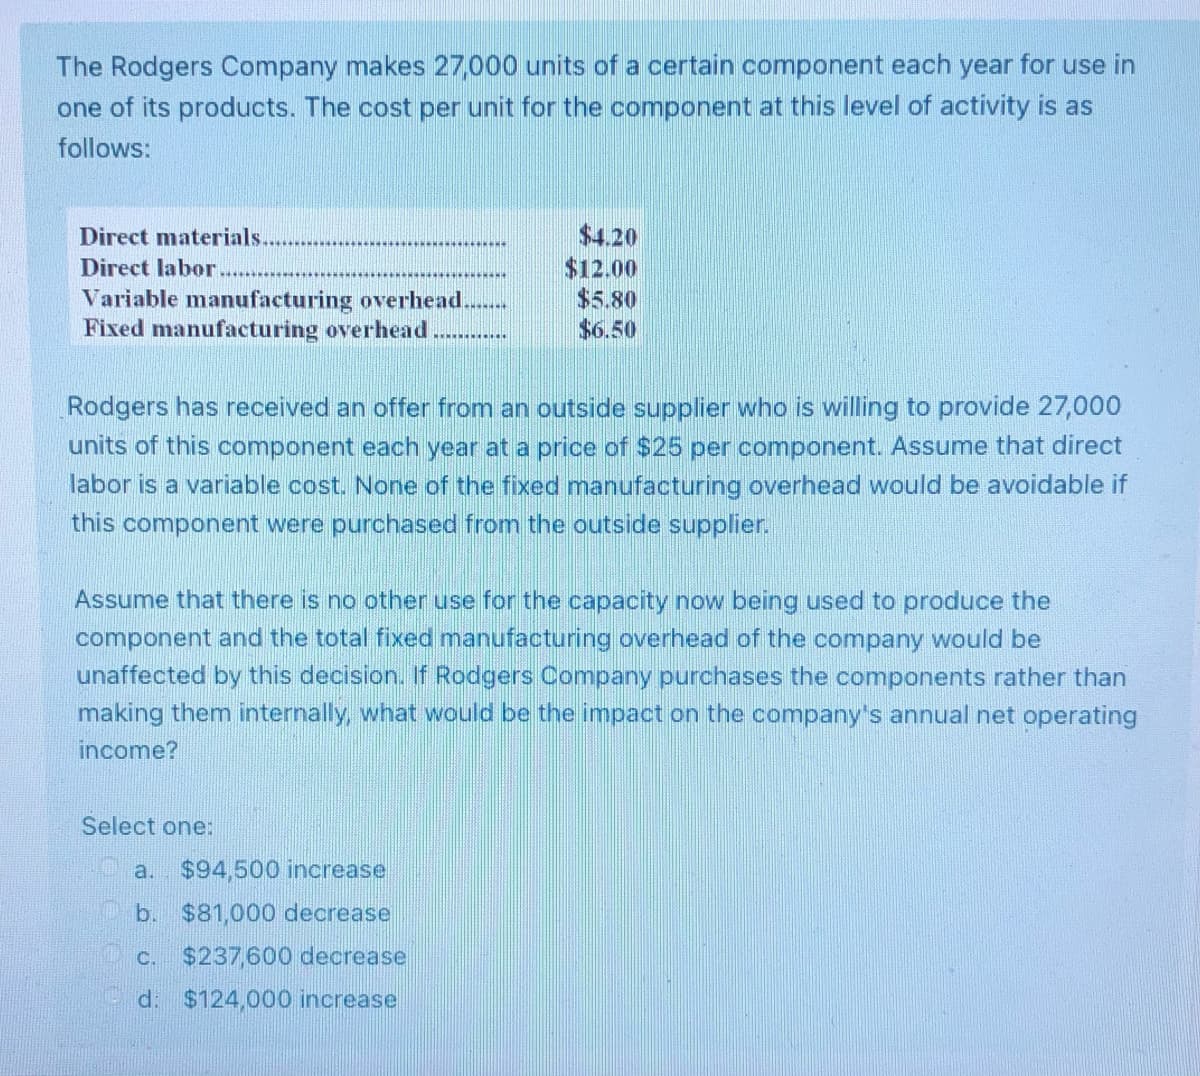 The Rodgers Company makes 27,000 units of a certain component each year for use in
one of its products. The cost per unit for the component at this level of activity is as
follows:
Direct materials.
$4.20
Direct labor.
$12.00
$5.80
Variable manufacturing overhead.
Fixed manufacturing overhead
$6.50
******
Rodgers has received an offer from an outside supplier who is willing to provide 27,000
units of this component each year at a price of $25 per component. Assume that direct
labor is a variable cost. None of the fixed manufacturing overhead would be avoidable if
this component were purchased from the outside supplier.
Assume that there is no other use for the capacity now being used to produce the
component and the total fixed manufacturing overhead of the company would be
unaffected by this decision. If Rodgers Company purchases the components rather than
making them internally, what would be the impact on the company's annual net operating
income?
Select one:
a. $94,500 increase
b. $81,000 decrease
C. $237,600 decrease
d: $124,000 increase